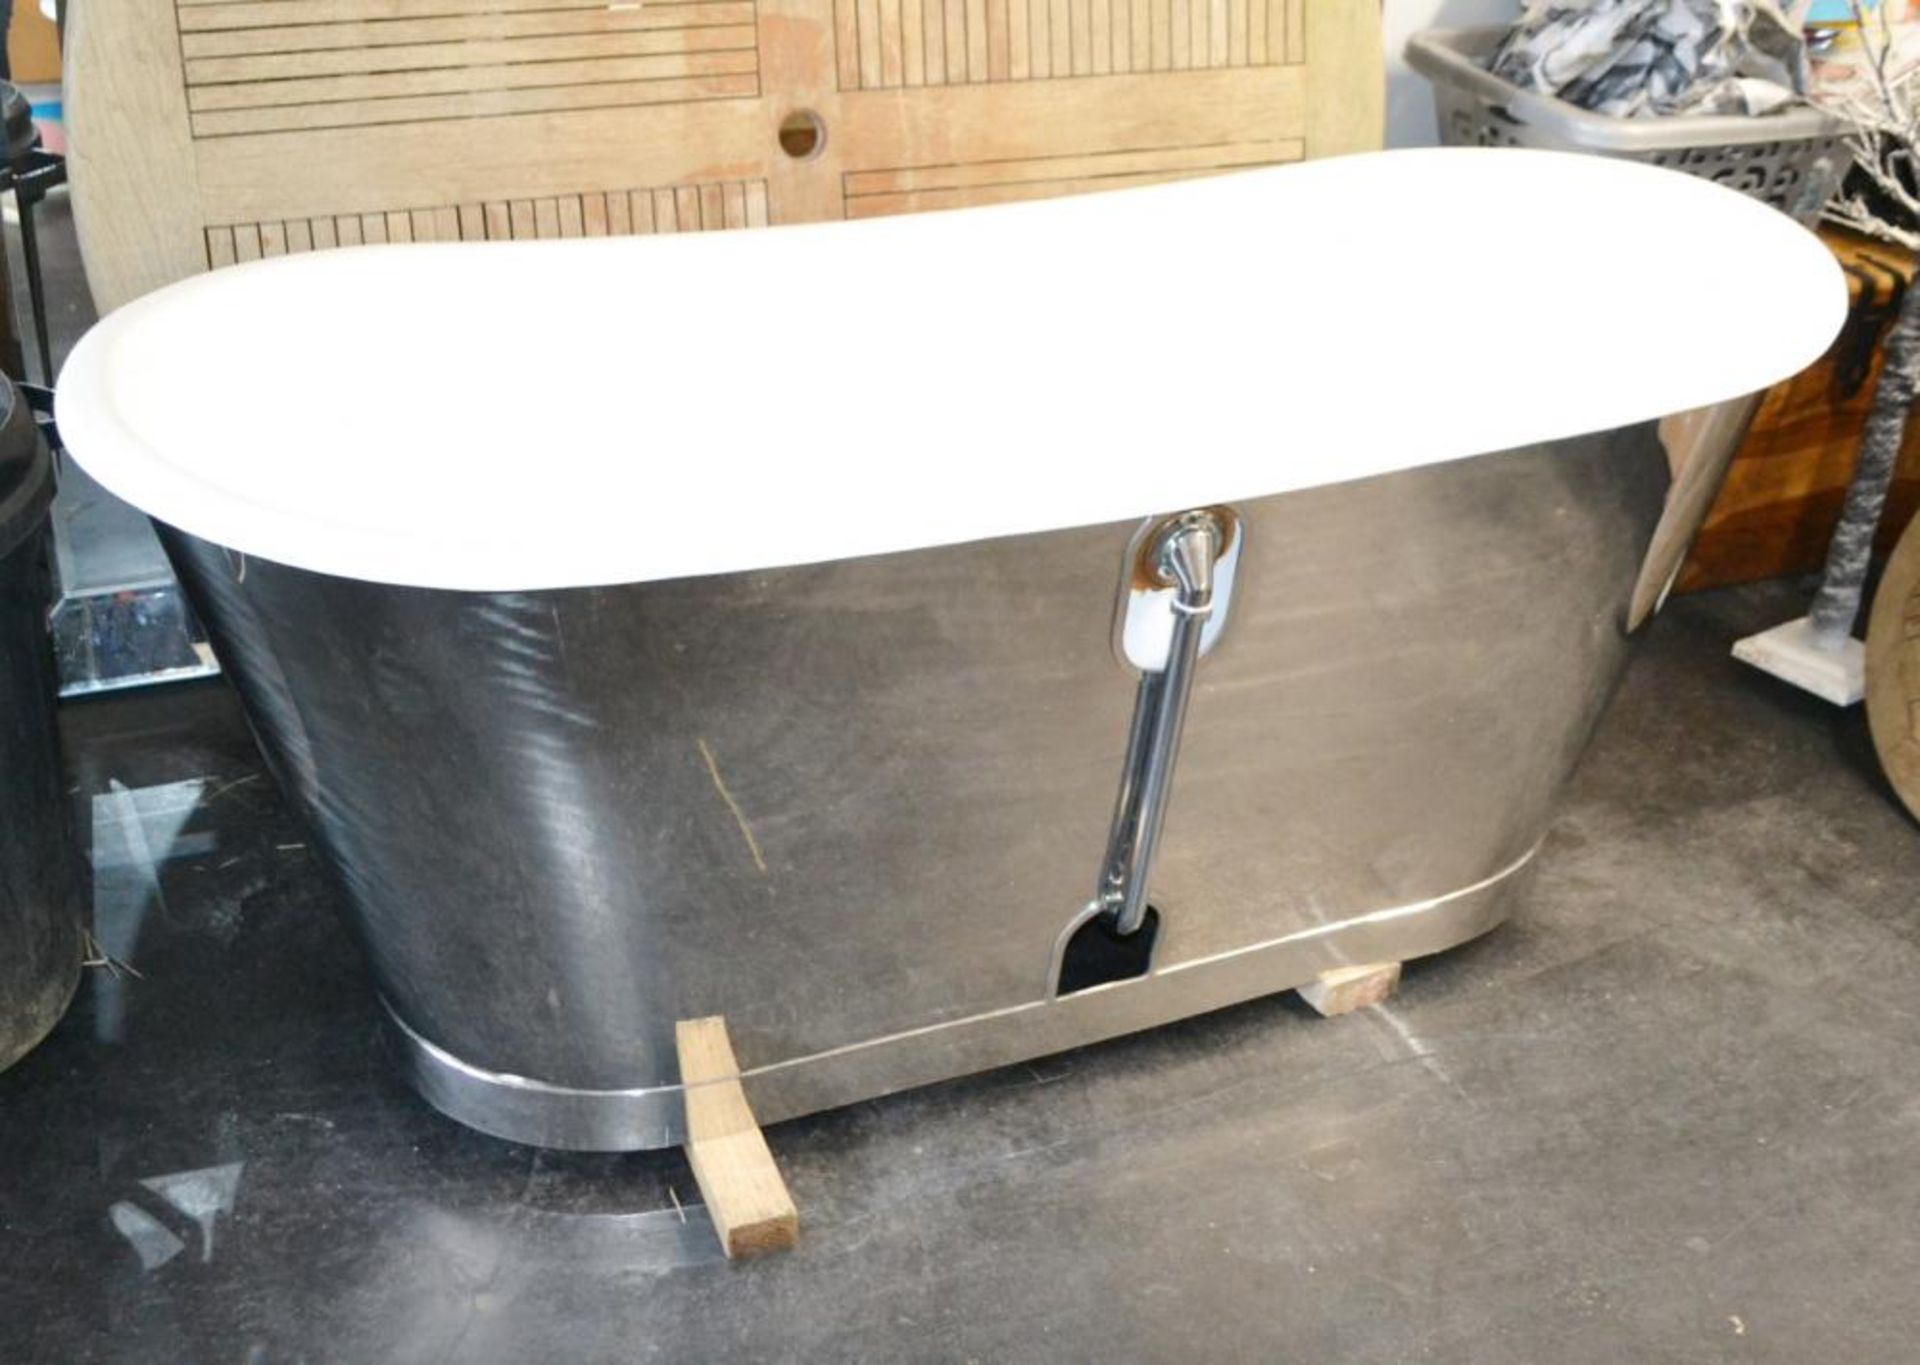 1 x Cast Iron Bath With Stainless Steel Exterior - CL439 - Location: Ilkey LS29 - Used In Good Condi - Image 8 of 8